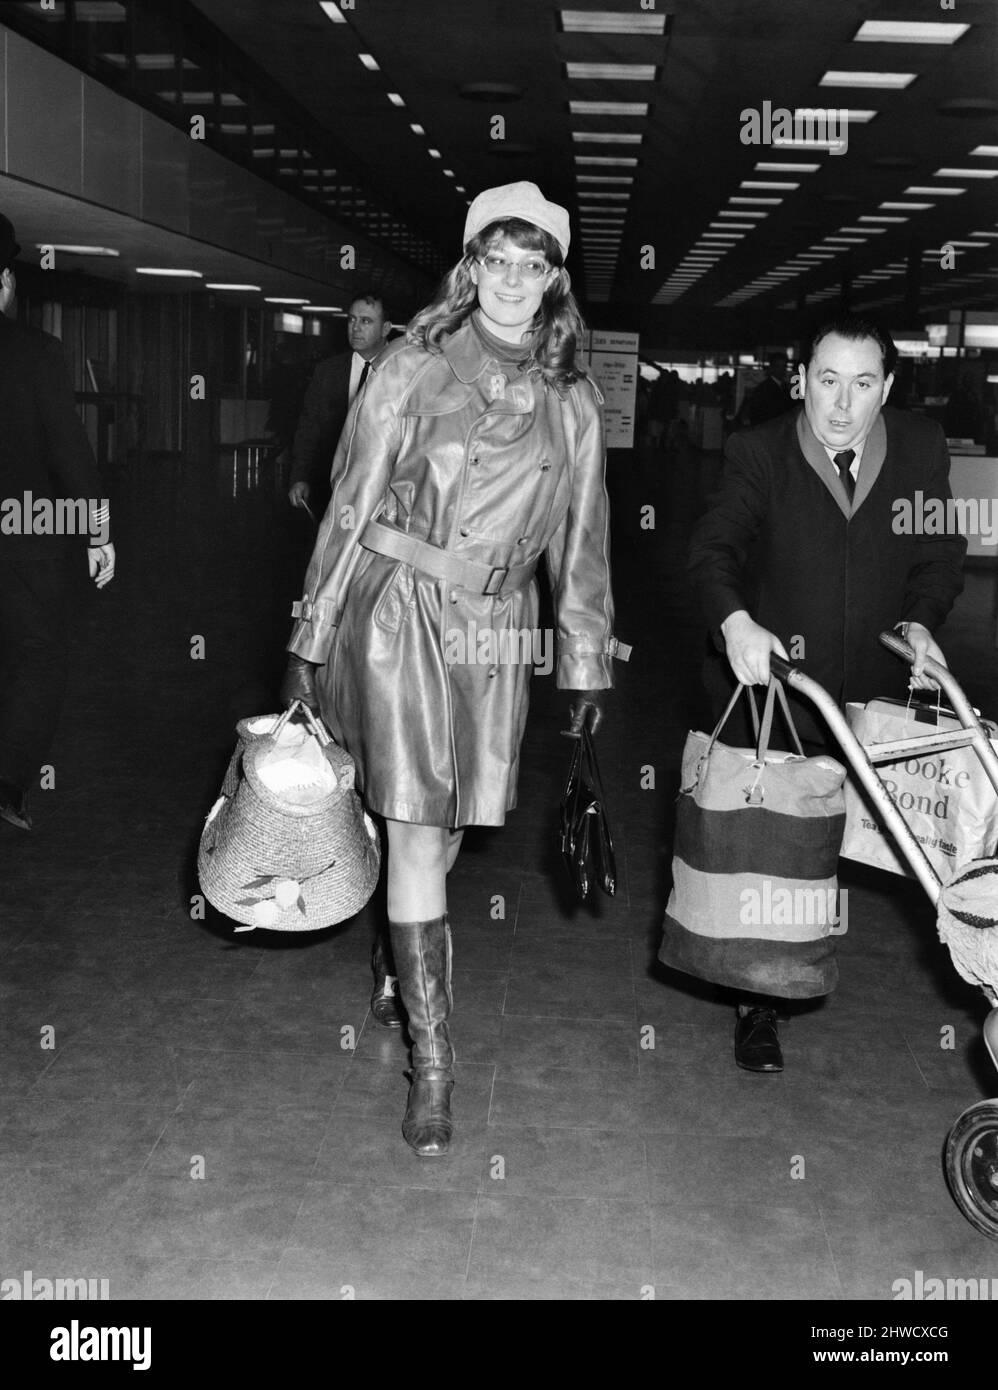 Entertainment. Film. Actress Vanessa Redgrave left Heathrow Airport  to fly to Madrid to be with her son's father Franco Nero. She was carrying her baby Carlo in what looked like a large raffia shopping basket. Vanessa Redgrave wearing all-leather clothes, with her baby Carlo in the large basket at Heathrow. November 1969 Z11252 Stock Photo